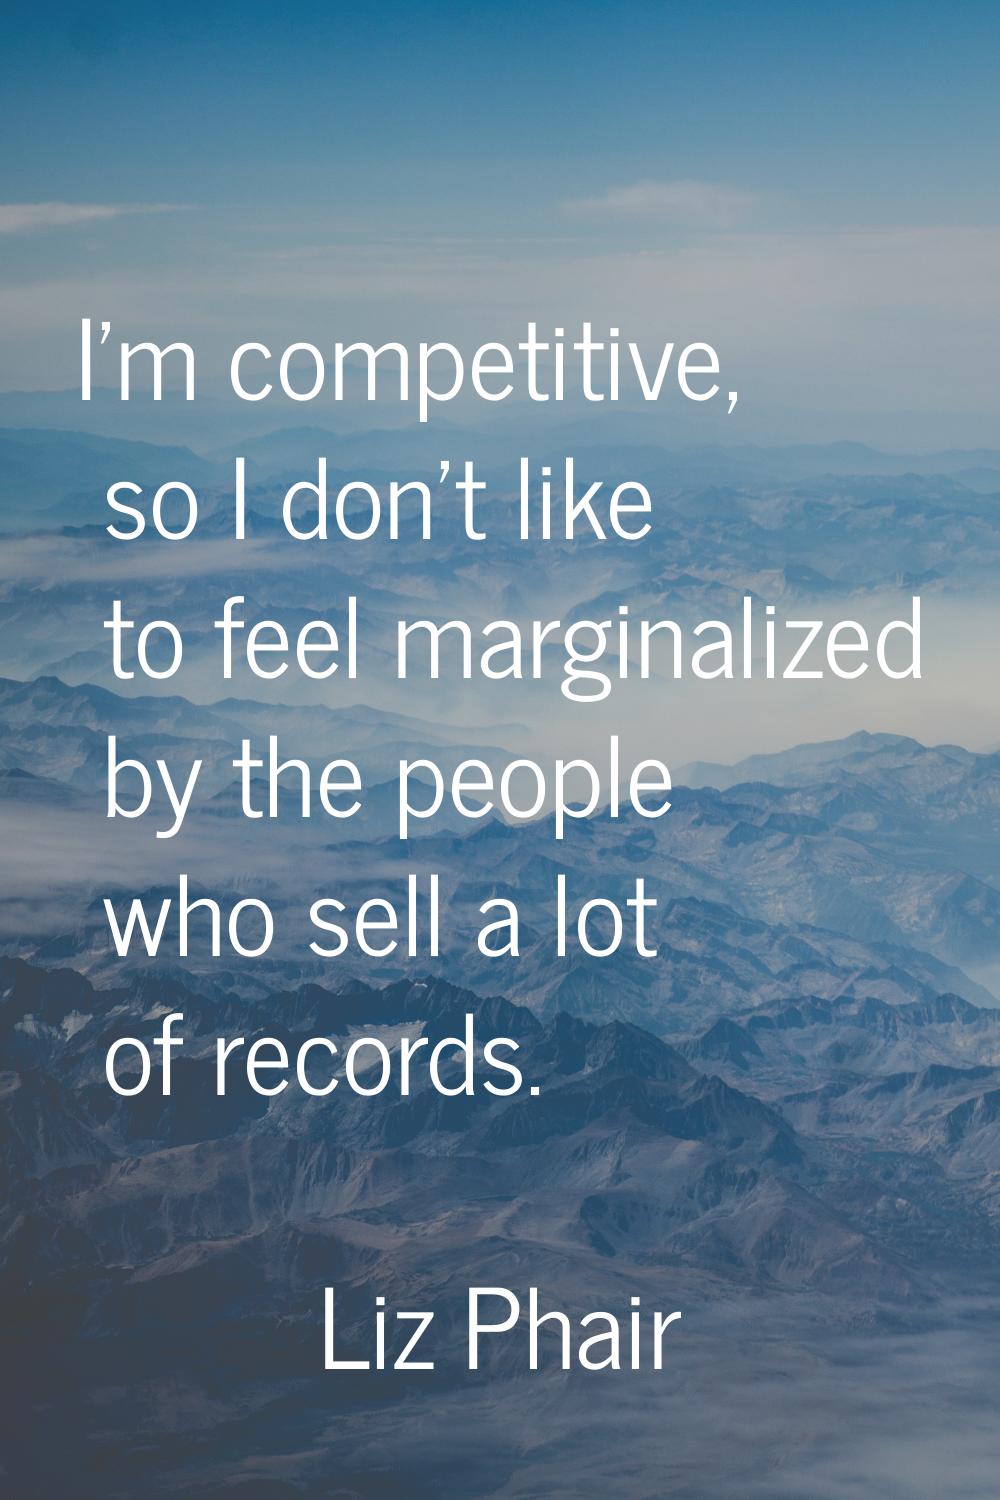 I'm competitive, so I don't like to feel marginalized by the people who sell a lot of records.